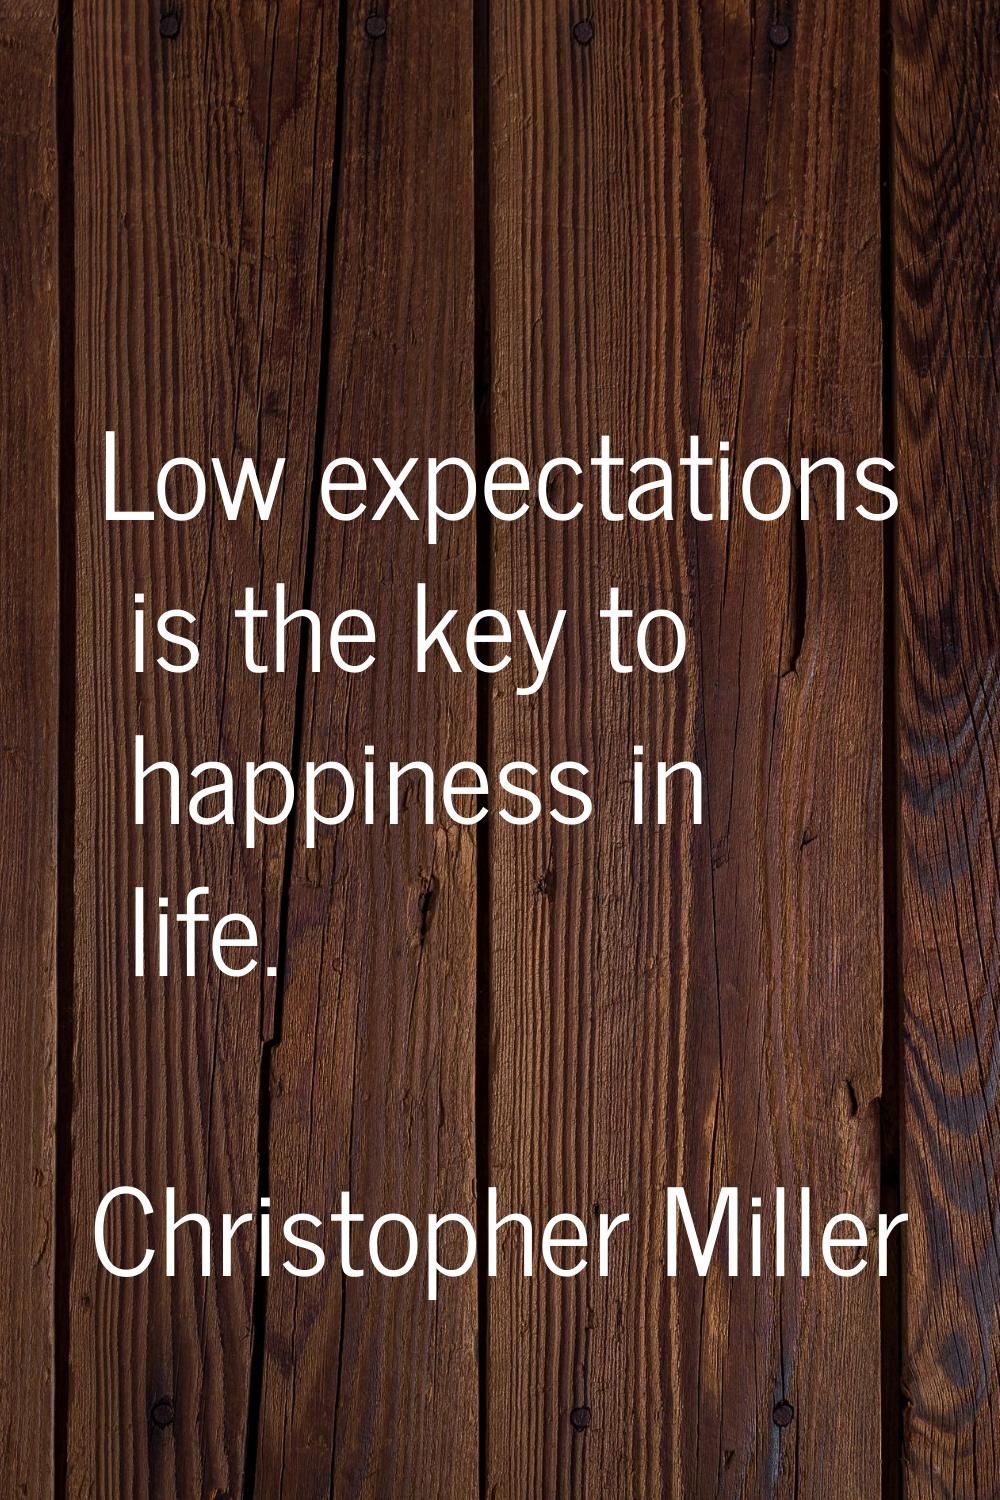 Low expectations is the key to happiness in life.